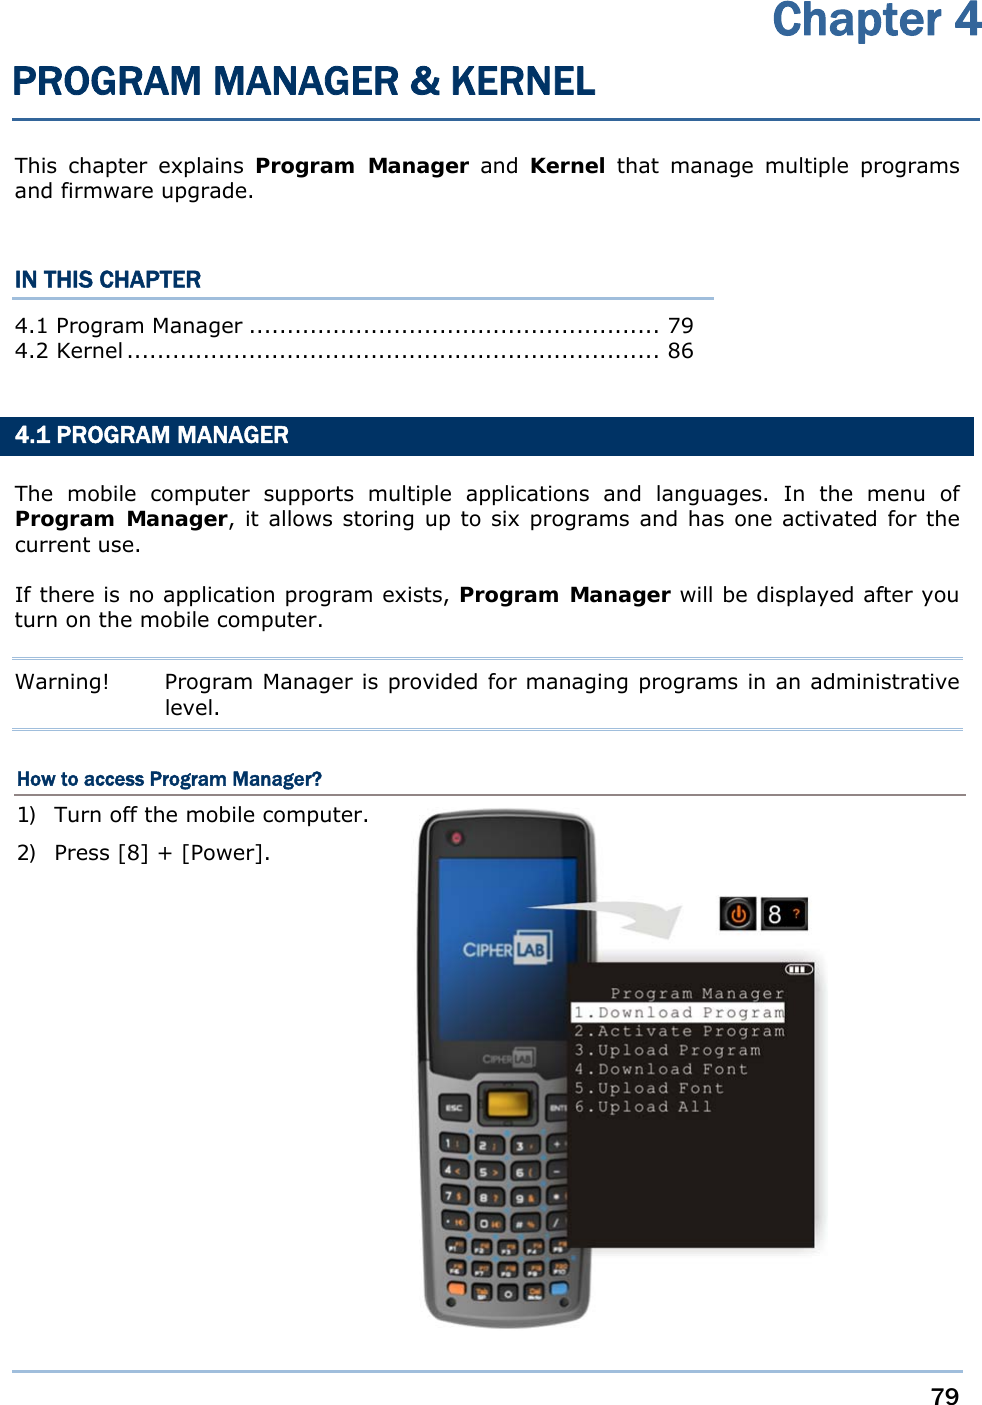     79   This chapter explains Program Manager and Kernel that manage multiple programs and firmware upgrade.  IN THIS CHAPTER 4.1 Program Manager ...................................................... 79 4.2 Kernel ......................................................................  86   4.1 PROGRAM MANAGER The mobile computer supports multiple applications and languages. In the menu of Program Manager, it allows storing up to six programs and has one activated for the current use. If there is no application program exists, Program Manager will be displayed after you turn on the mobile computer. Warning!  Program Manager is provided for managing programs in an administrative level. How to access Program Manager? 1) Turn off the mobile computer. 2) Press [8] + [Power].                Chapter 4 PROGRAM MANAGER &amp; KERNEL 